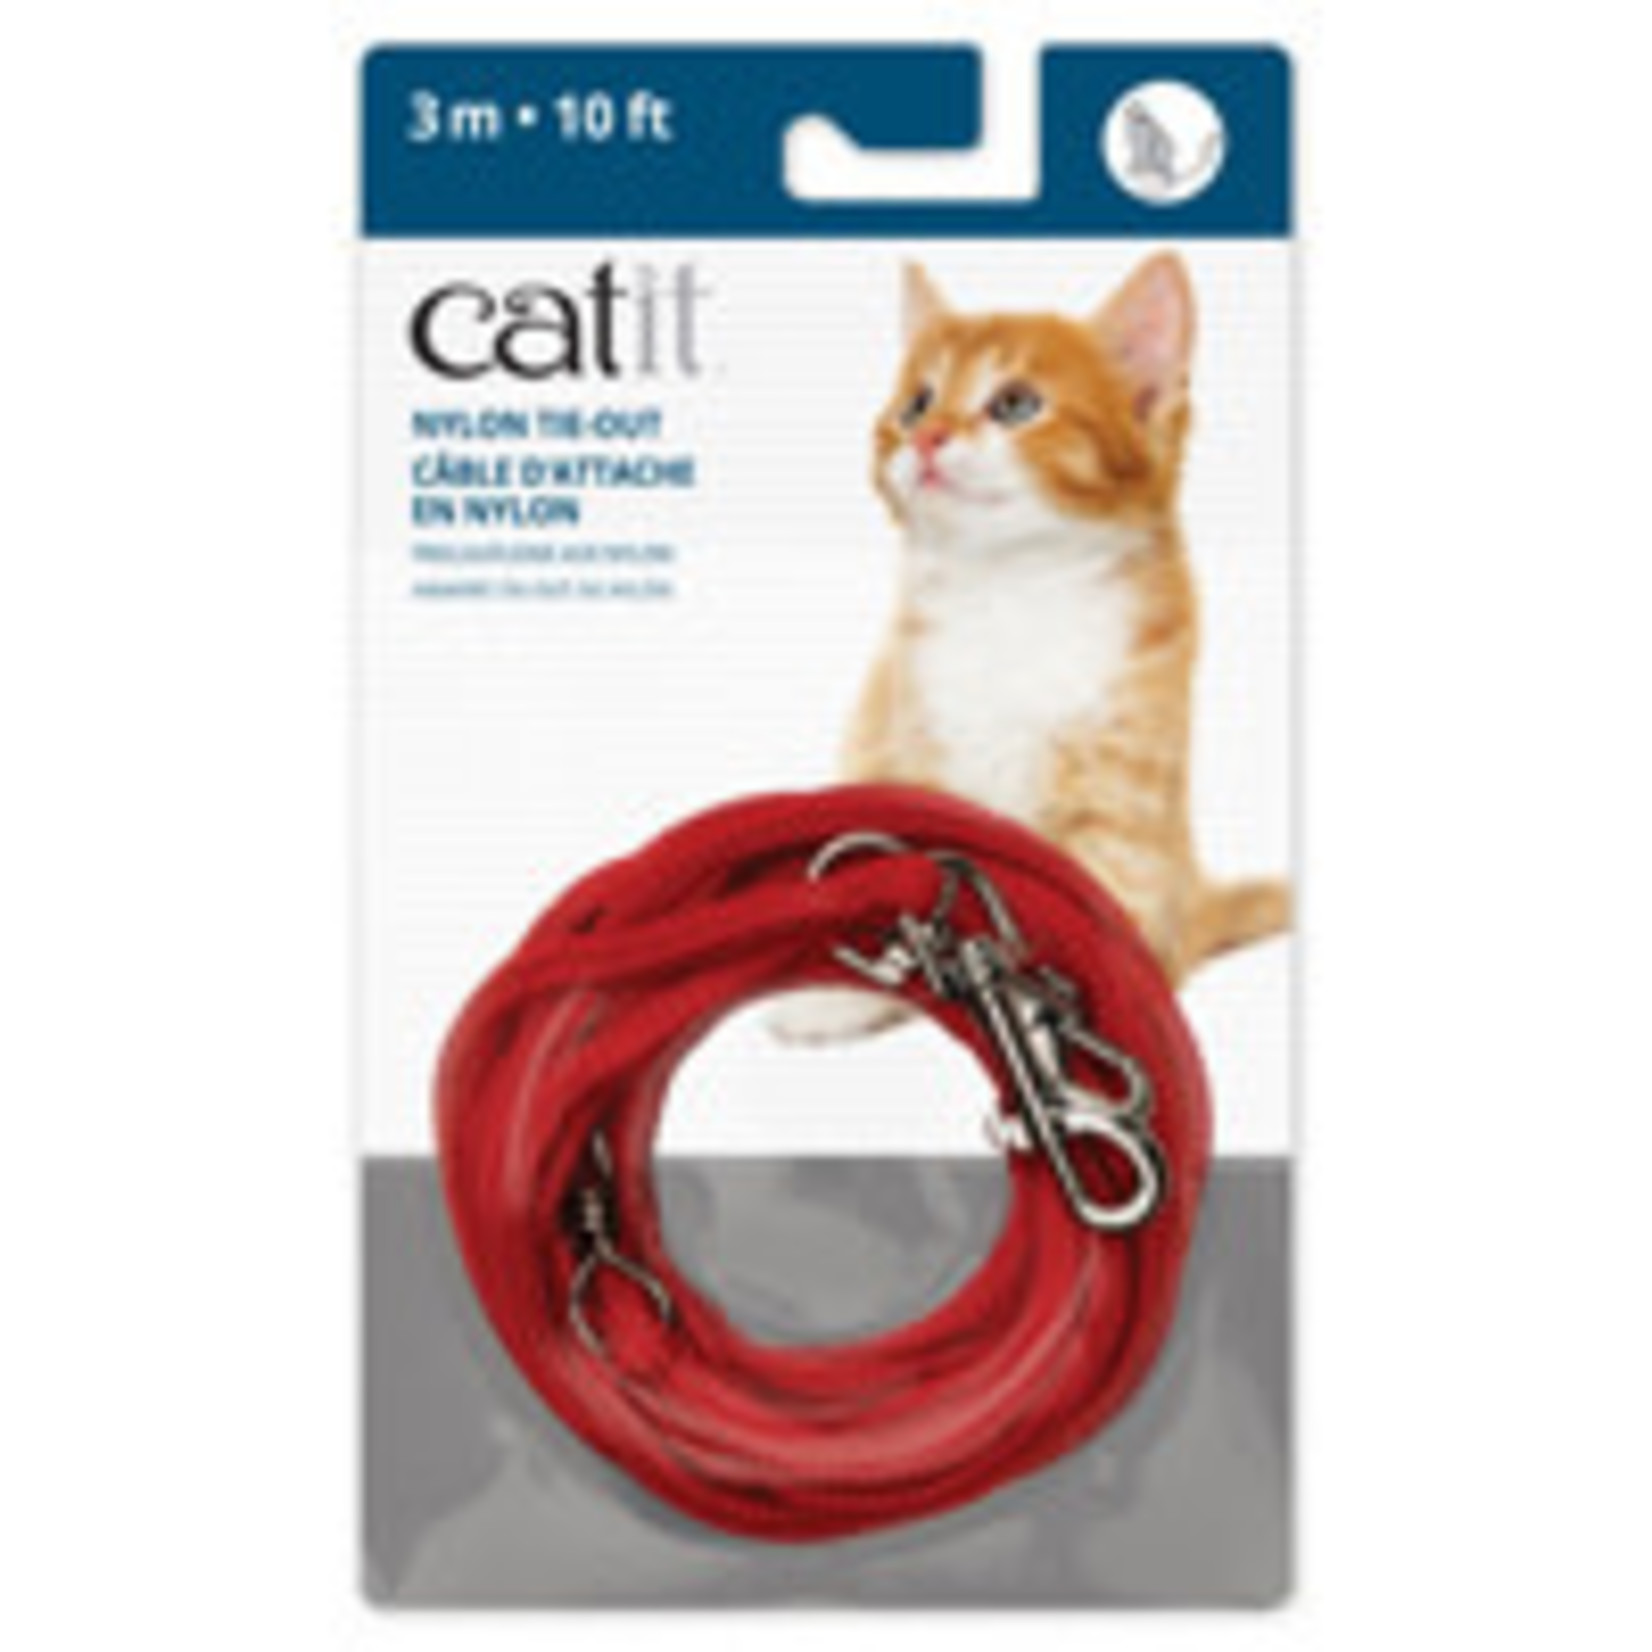 CAT IT (W) CA Nyl. Tie-out, 3m (10 ft), Red